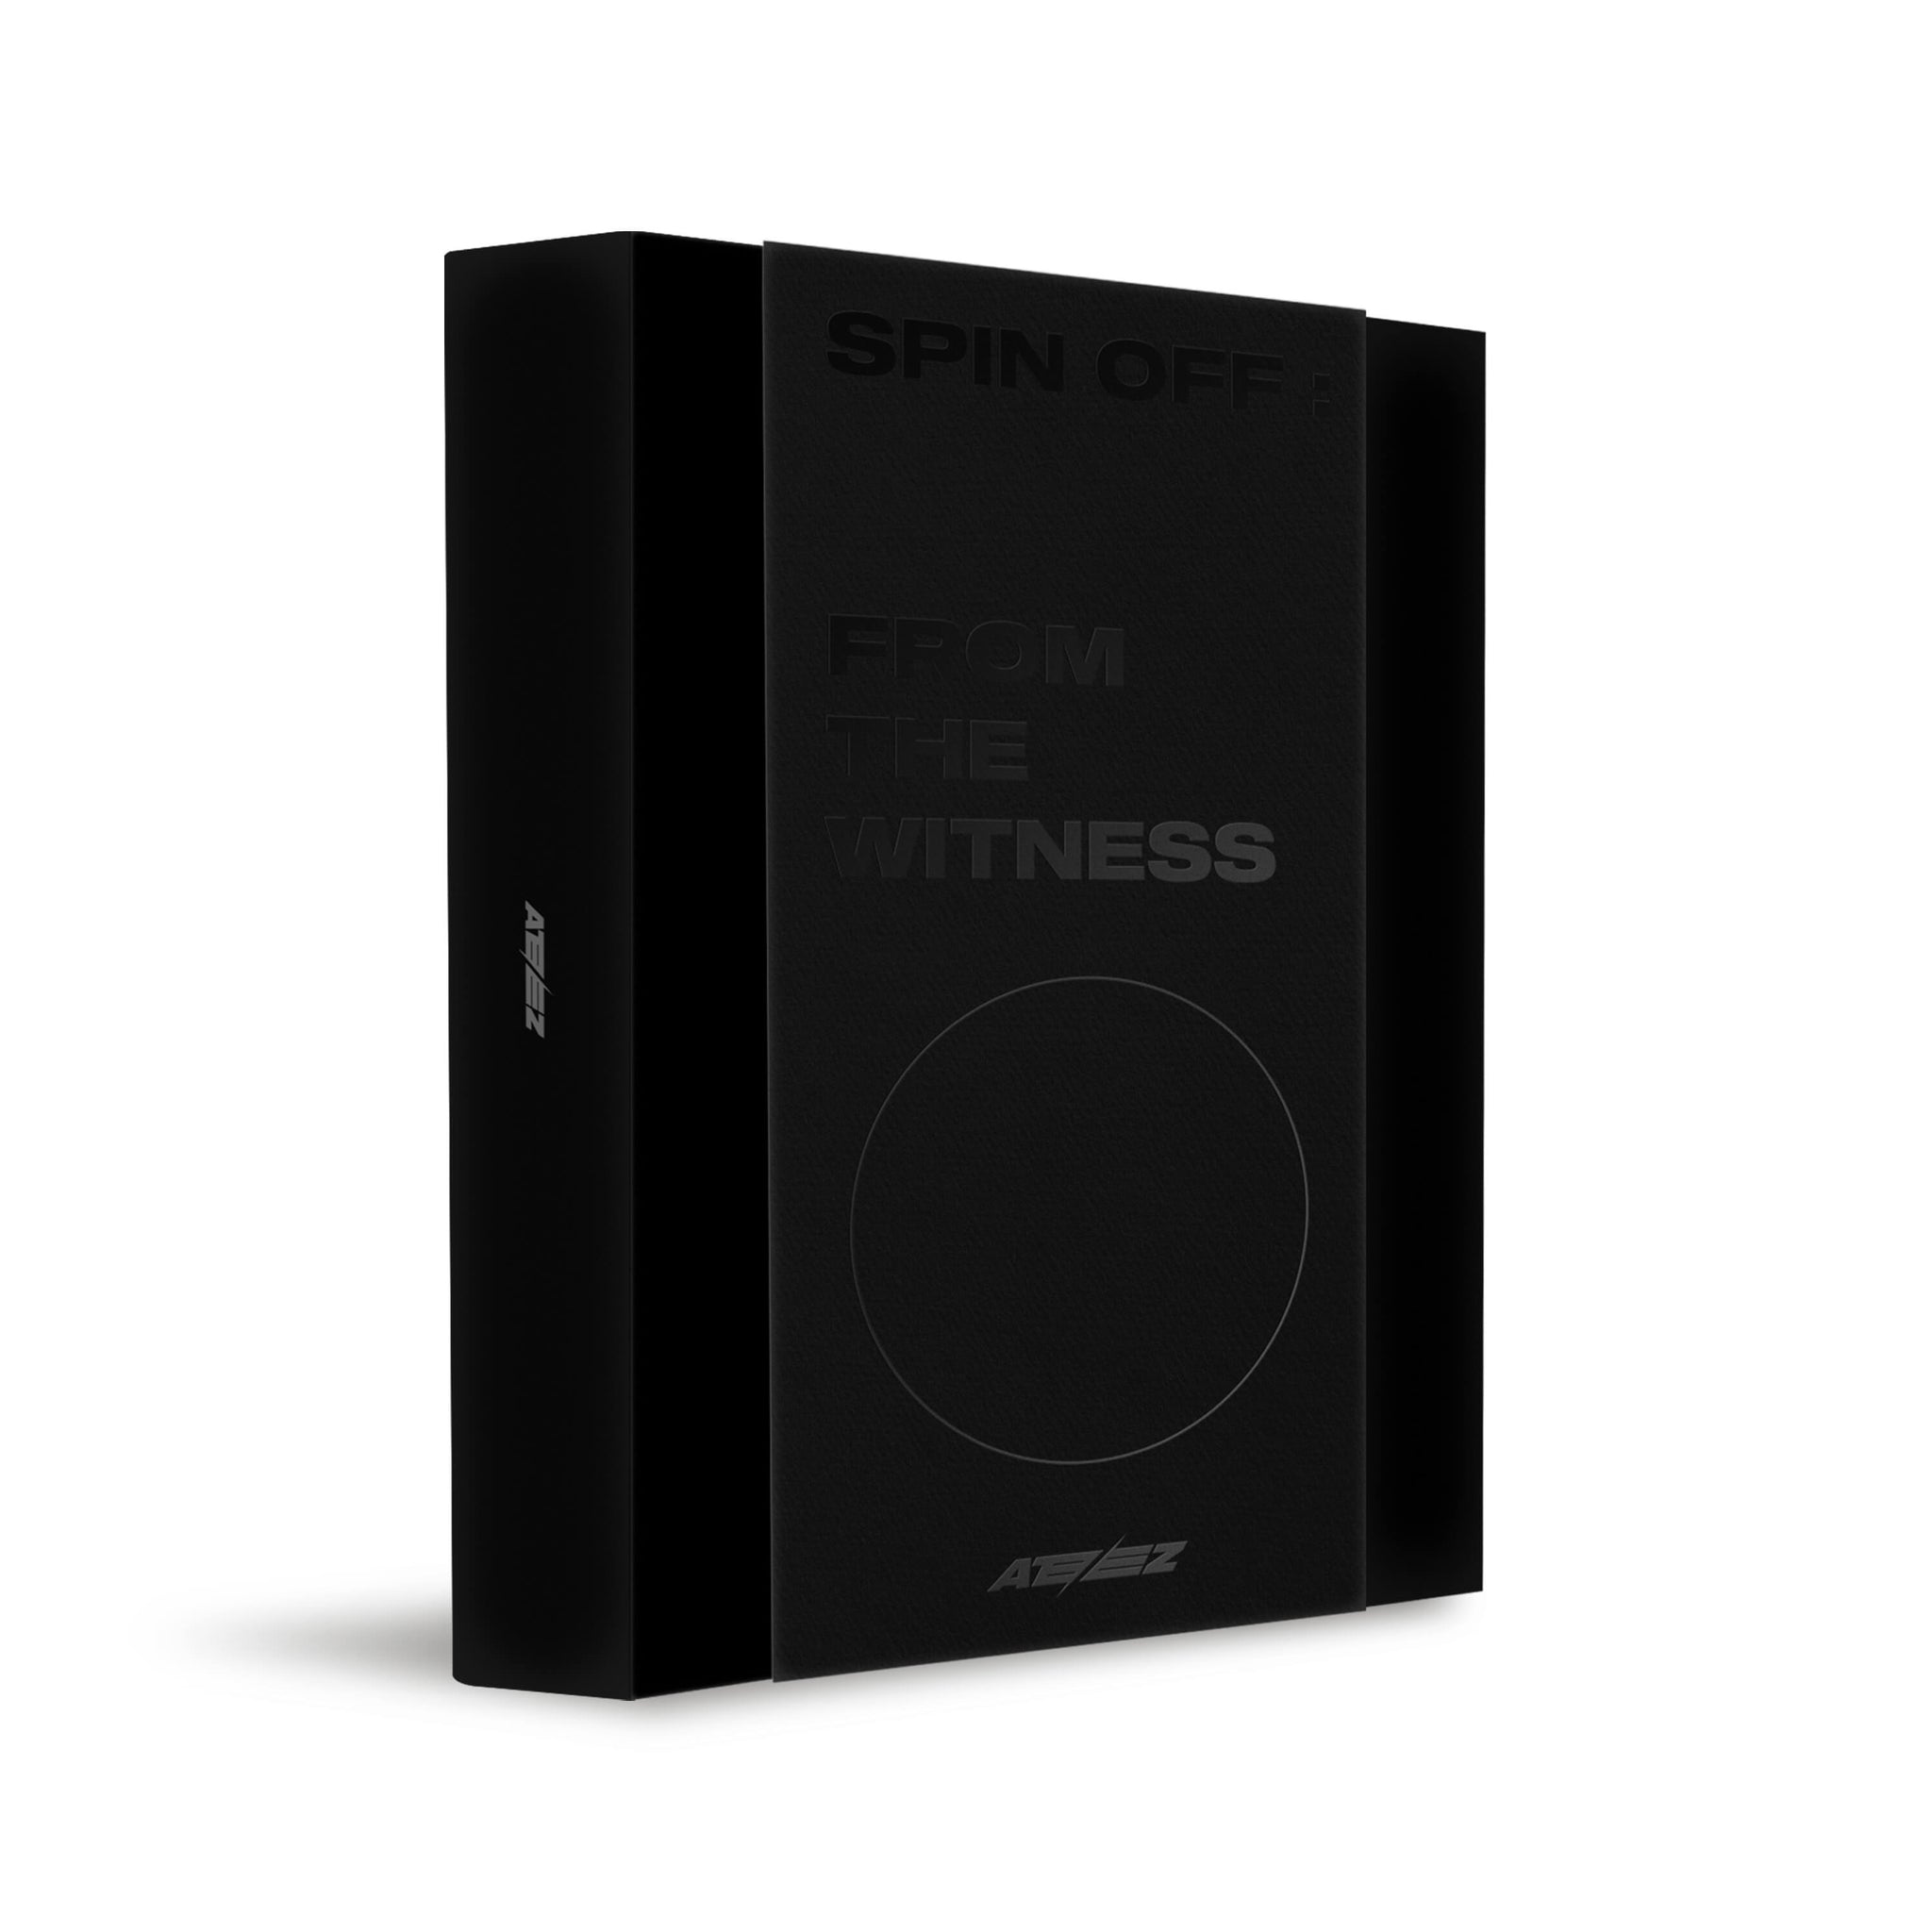 ATEEZ 1st Single Album SPIN OFF: FROM THE WITNESS Limited Edition - WITNESS Version